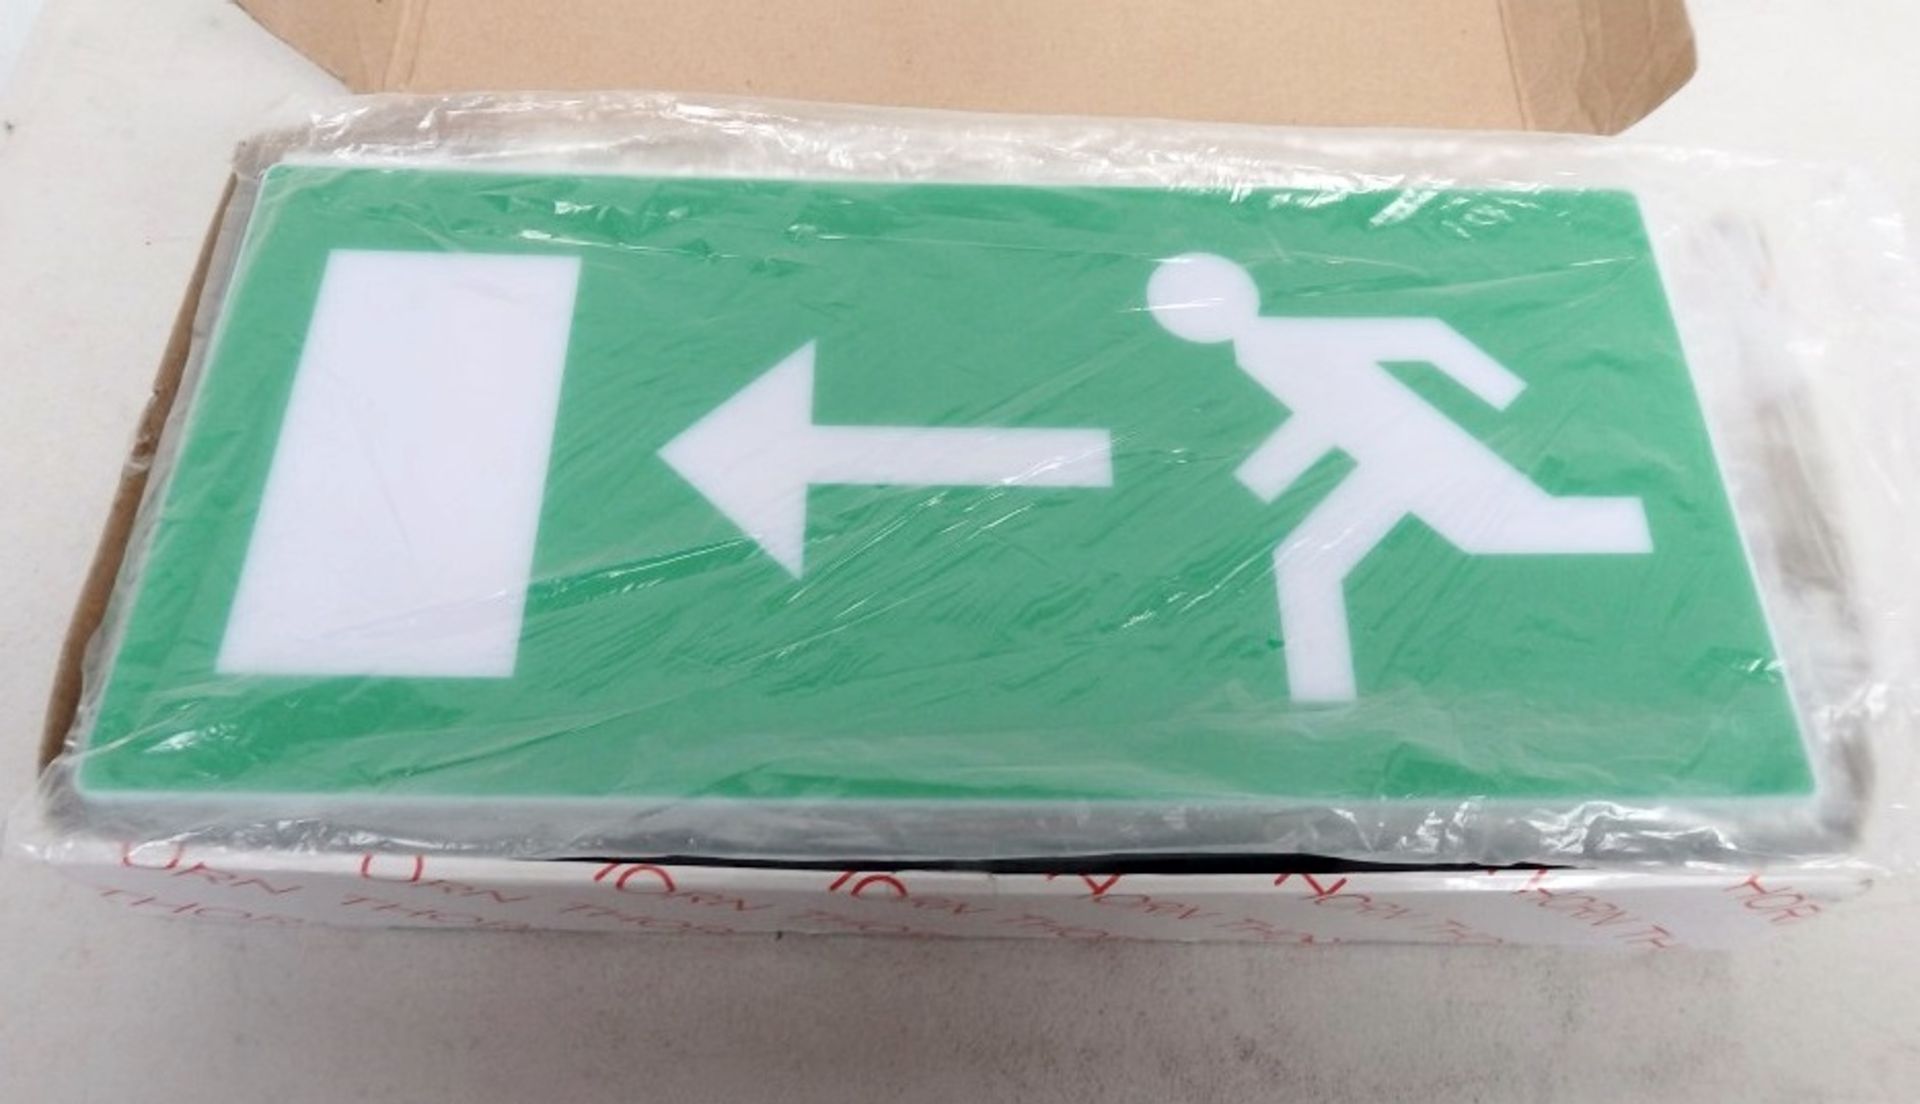 1 x THORN Voyager E Exit Sign - Model E3m - CL150 - Unused, Boxed Stock - Ref: HOT072 - Location: - Image 10 of 10